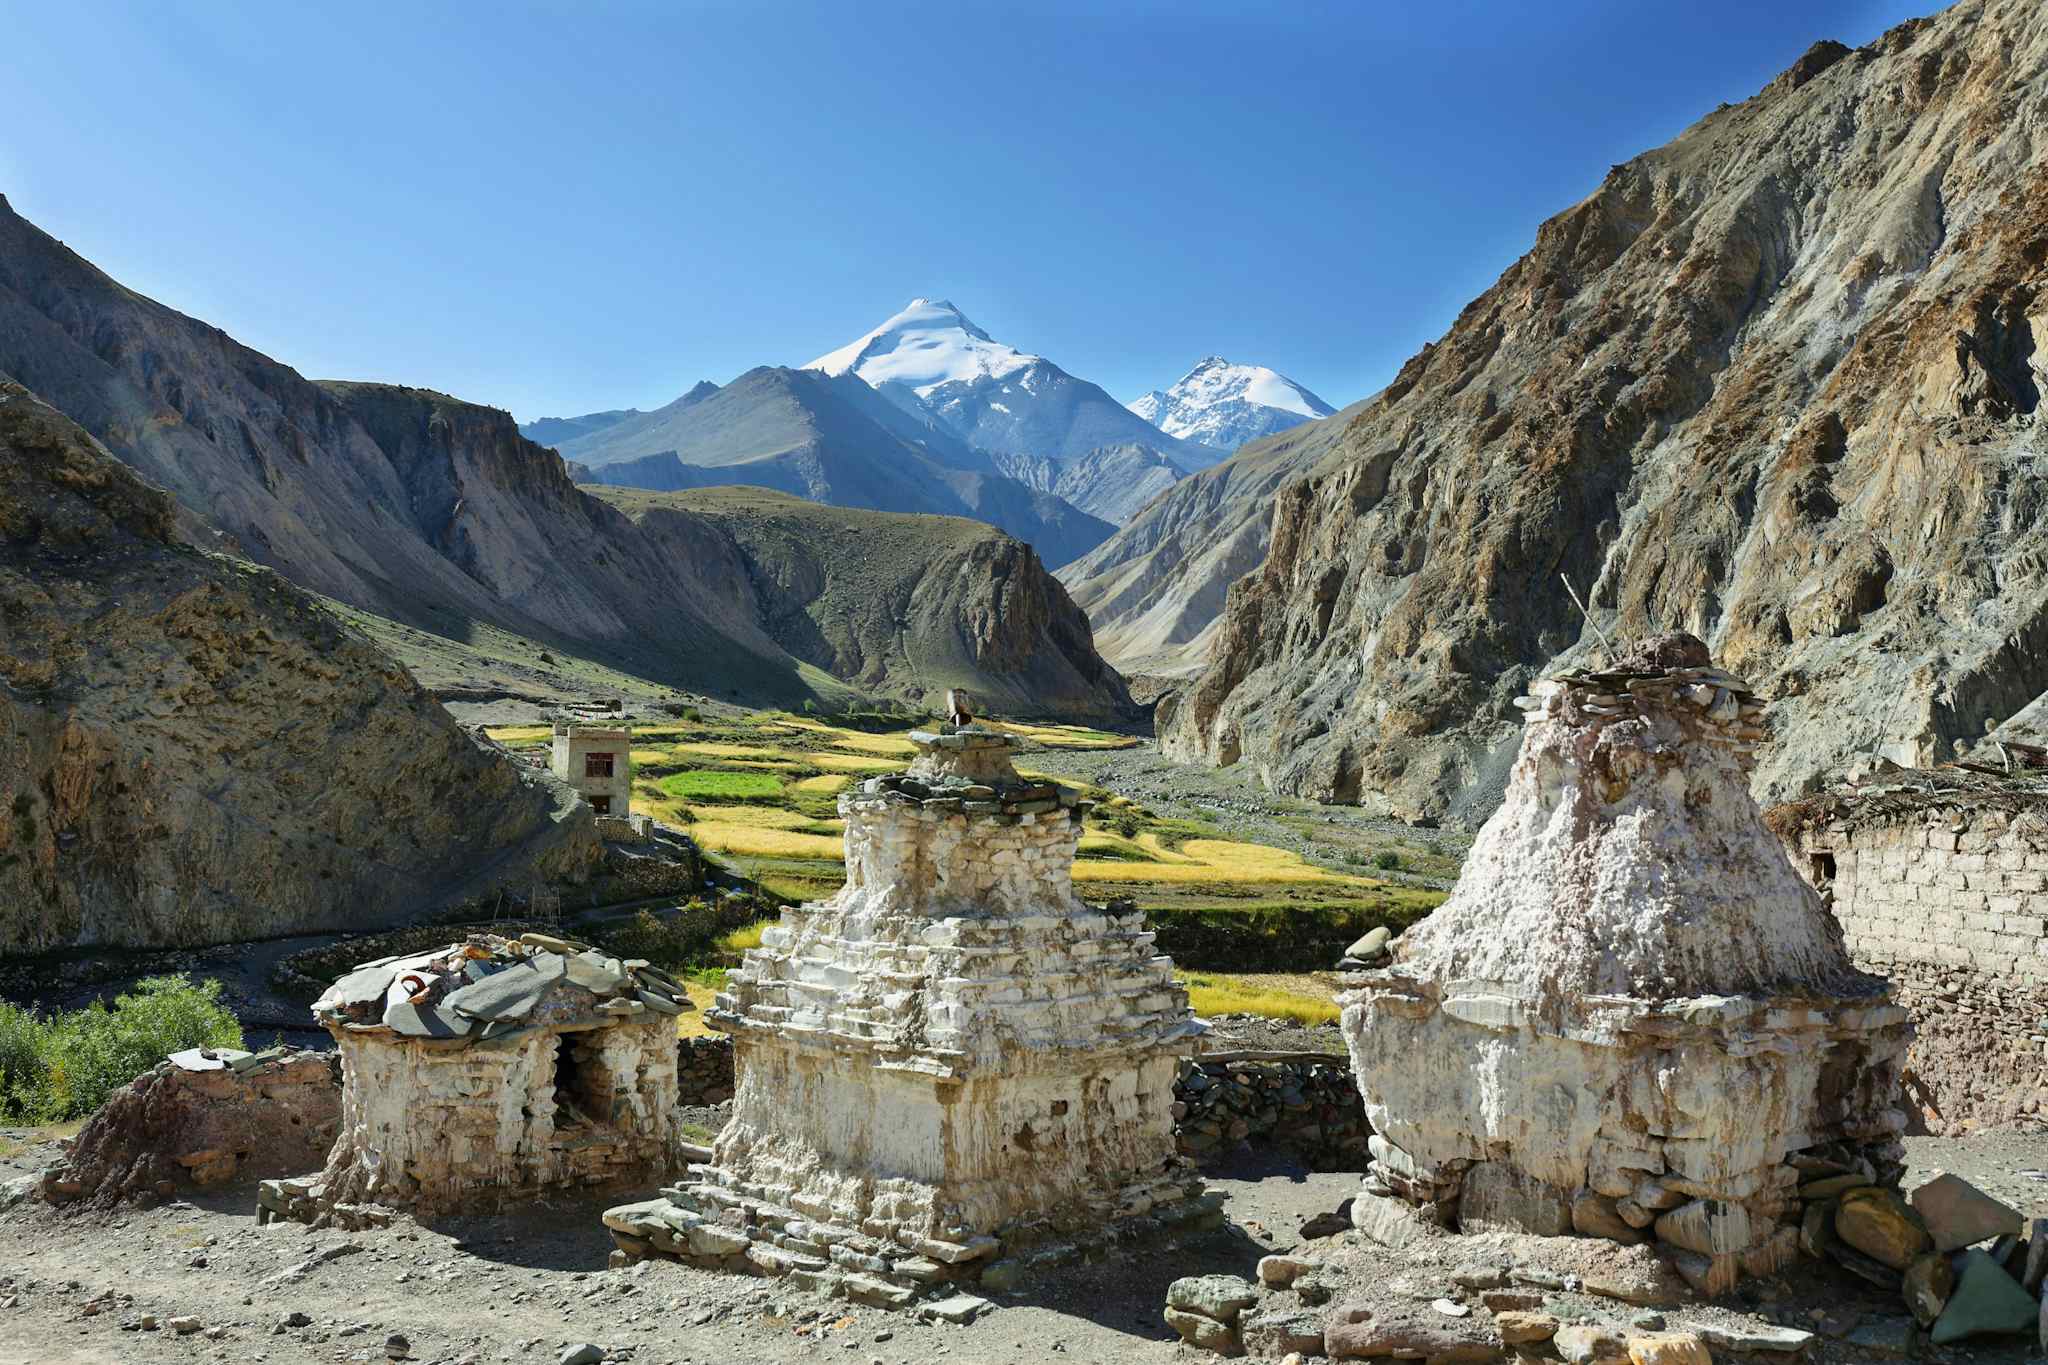 View of Kang Yatse from the Markha Valley trek, with ruined stupas in the foreground in Ladakh, India.